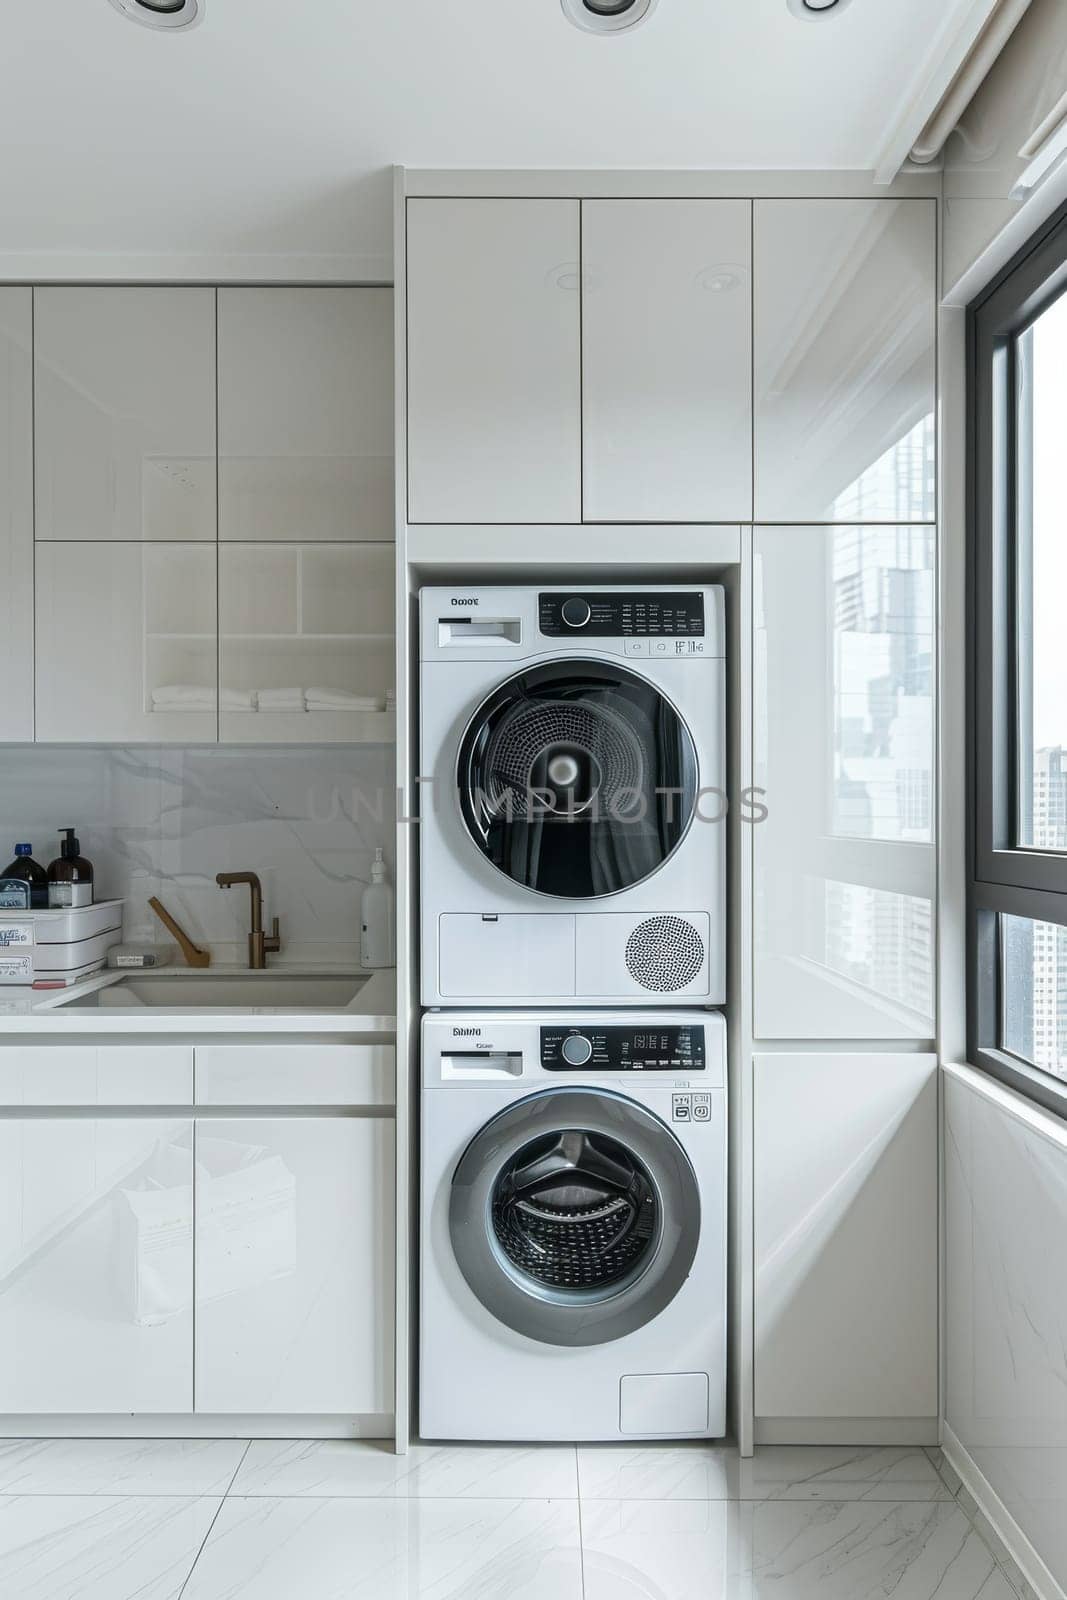 A white washer and dryer are in a kitchen.